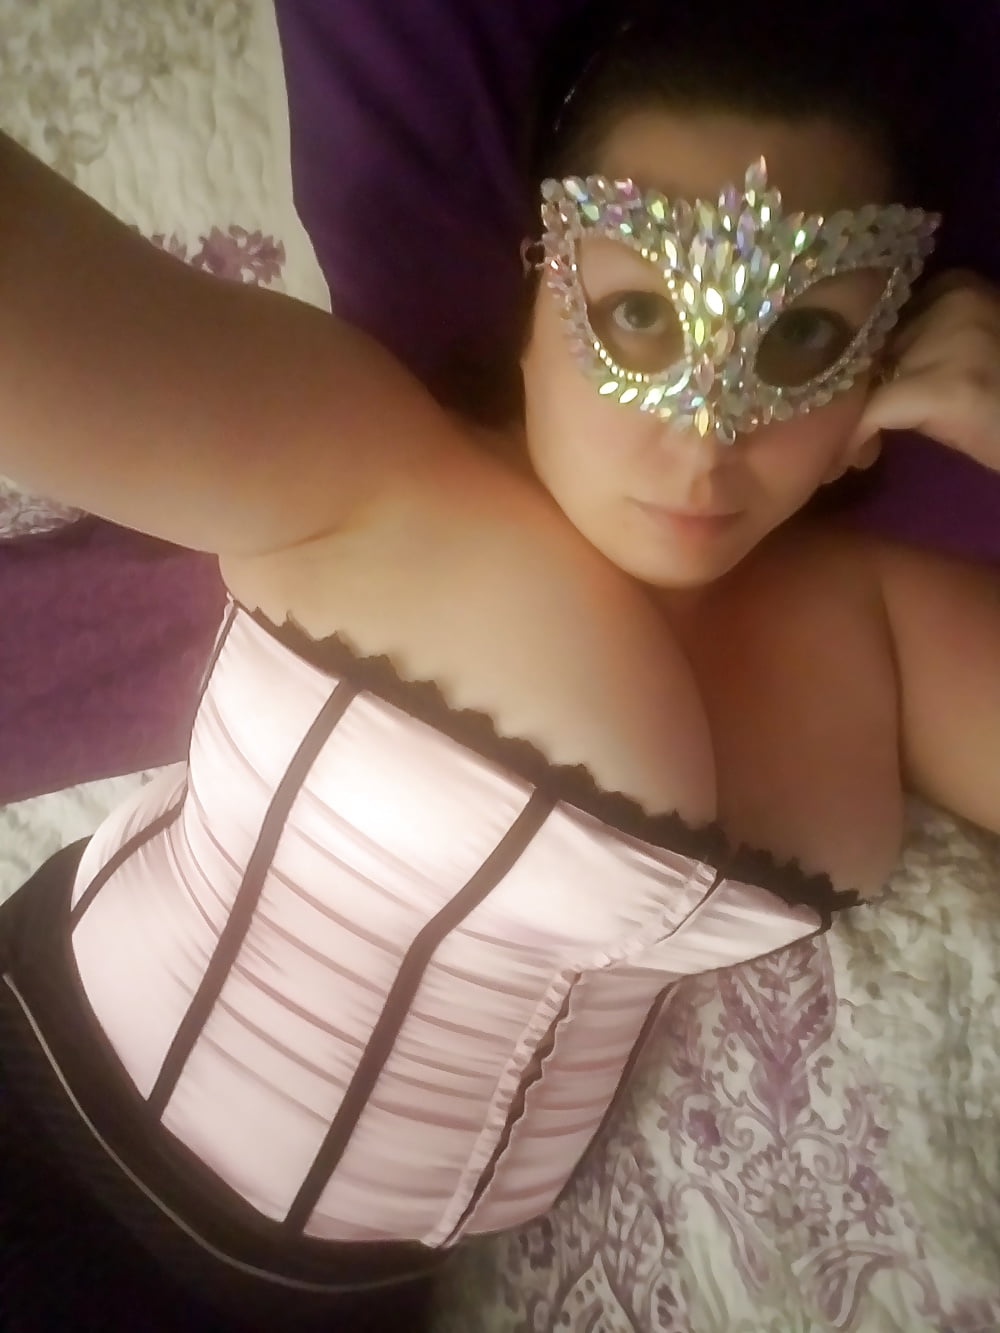 Dainty Pink Corset skirt and heels &amp; favorite crystal mask #106719509